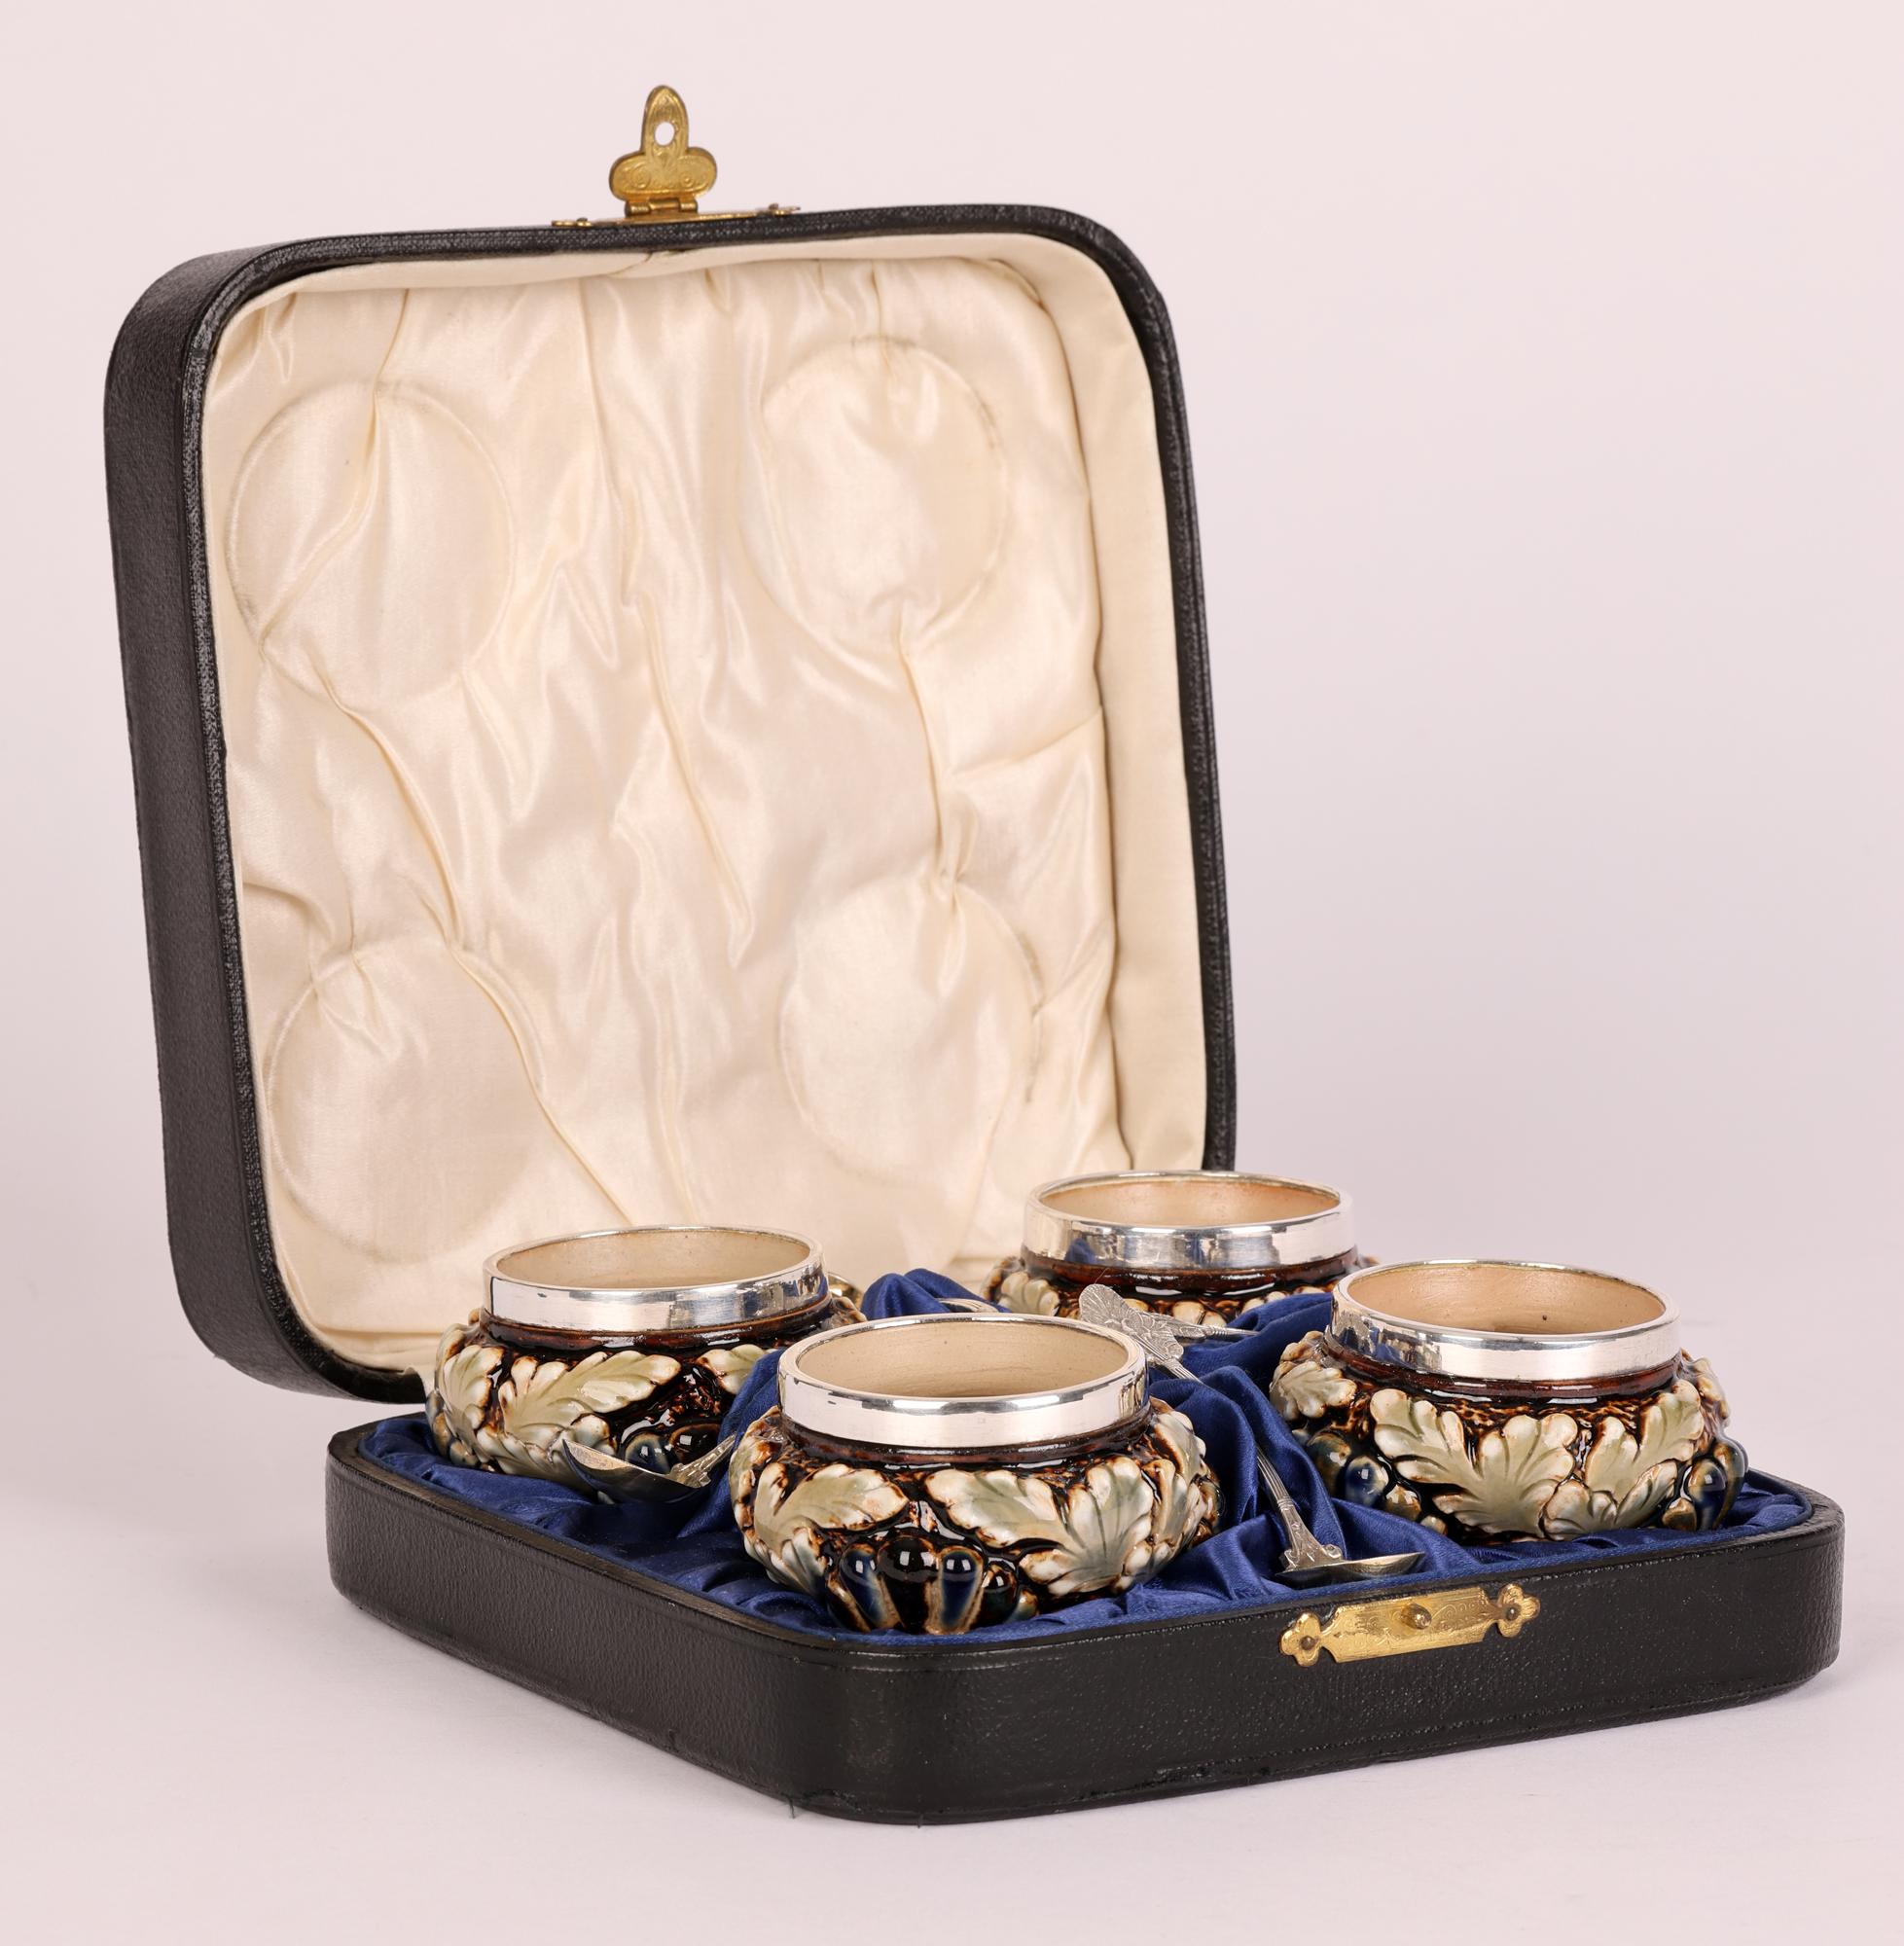 Aesthetic Movement Elizabeth Atkins for Doulton Lambeth Cased Set of Four Salts and Spoons, 1883